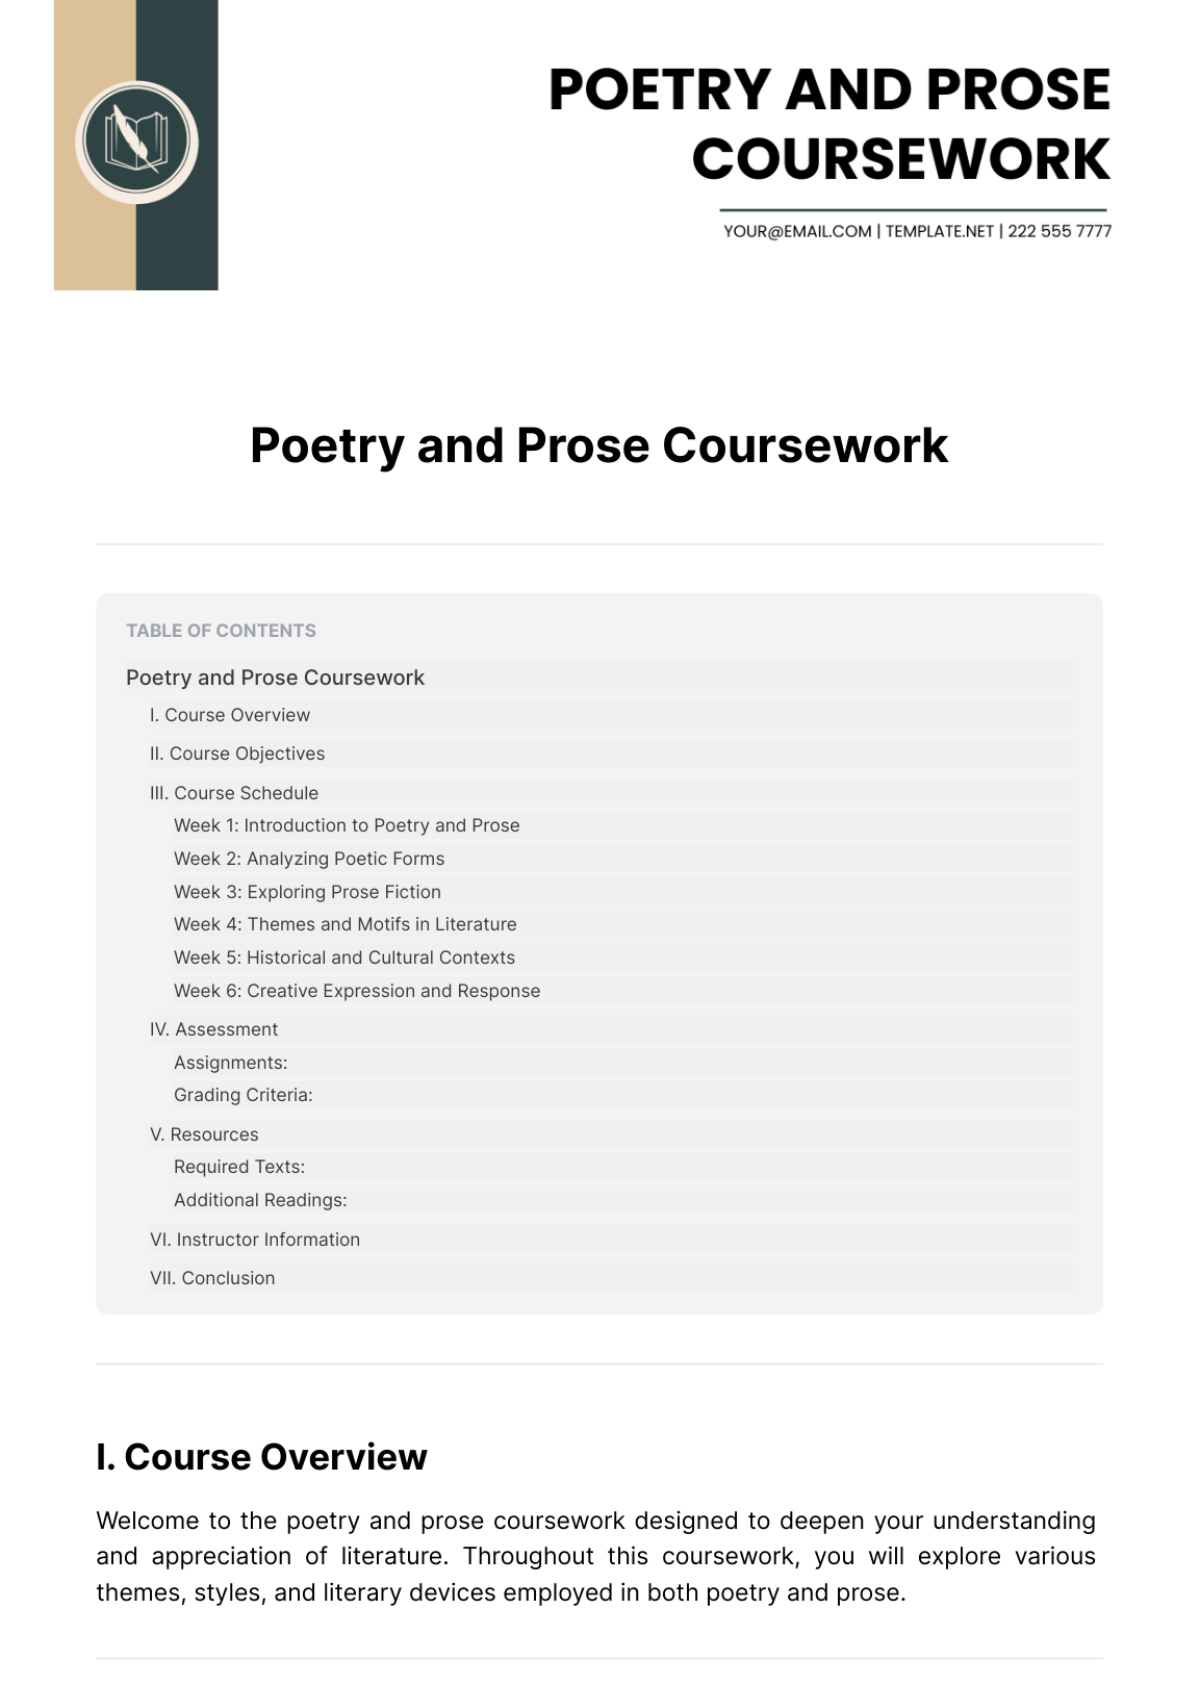 Poetry and Prose Coursework Template